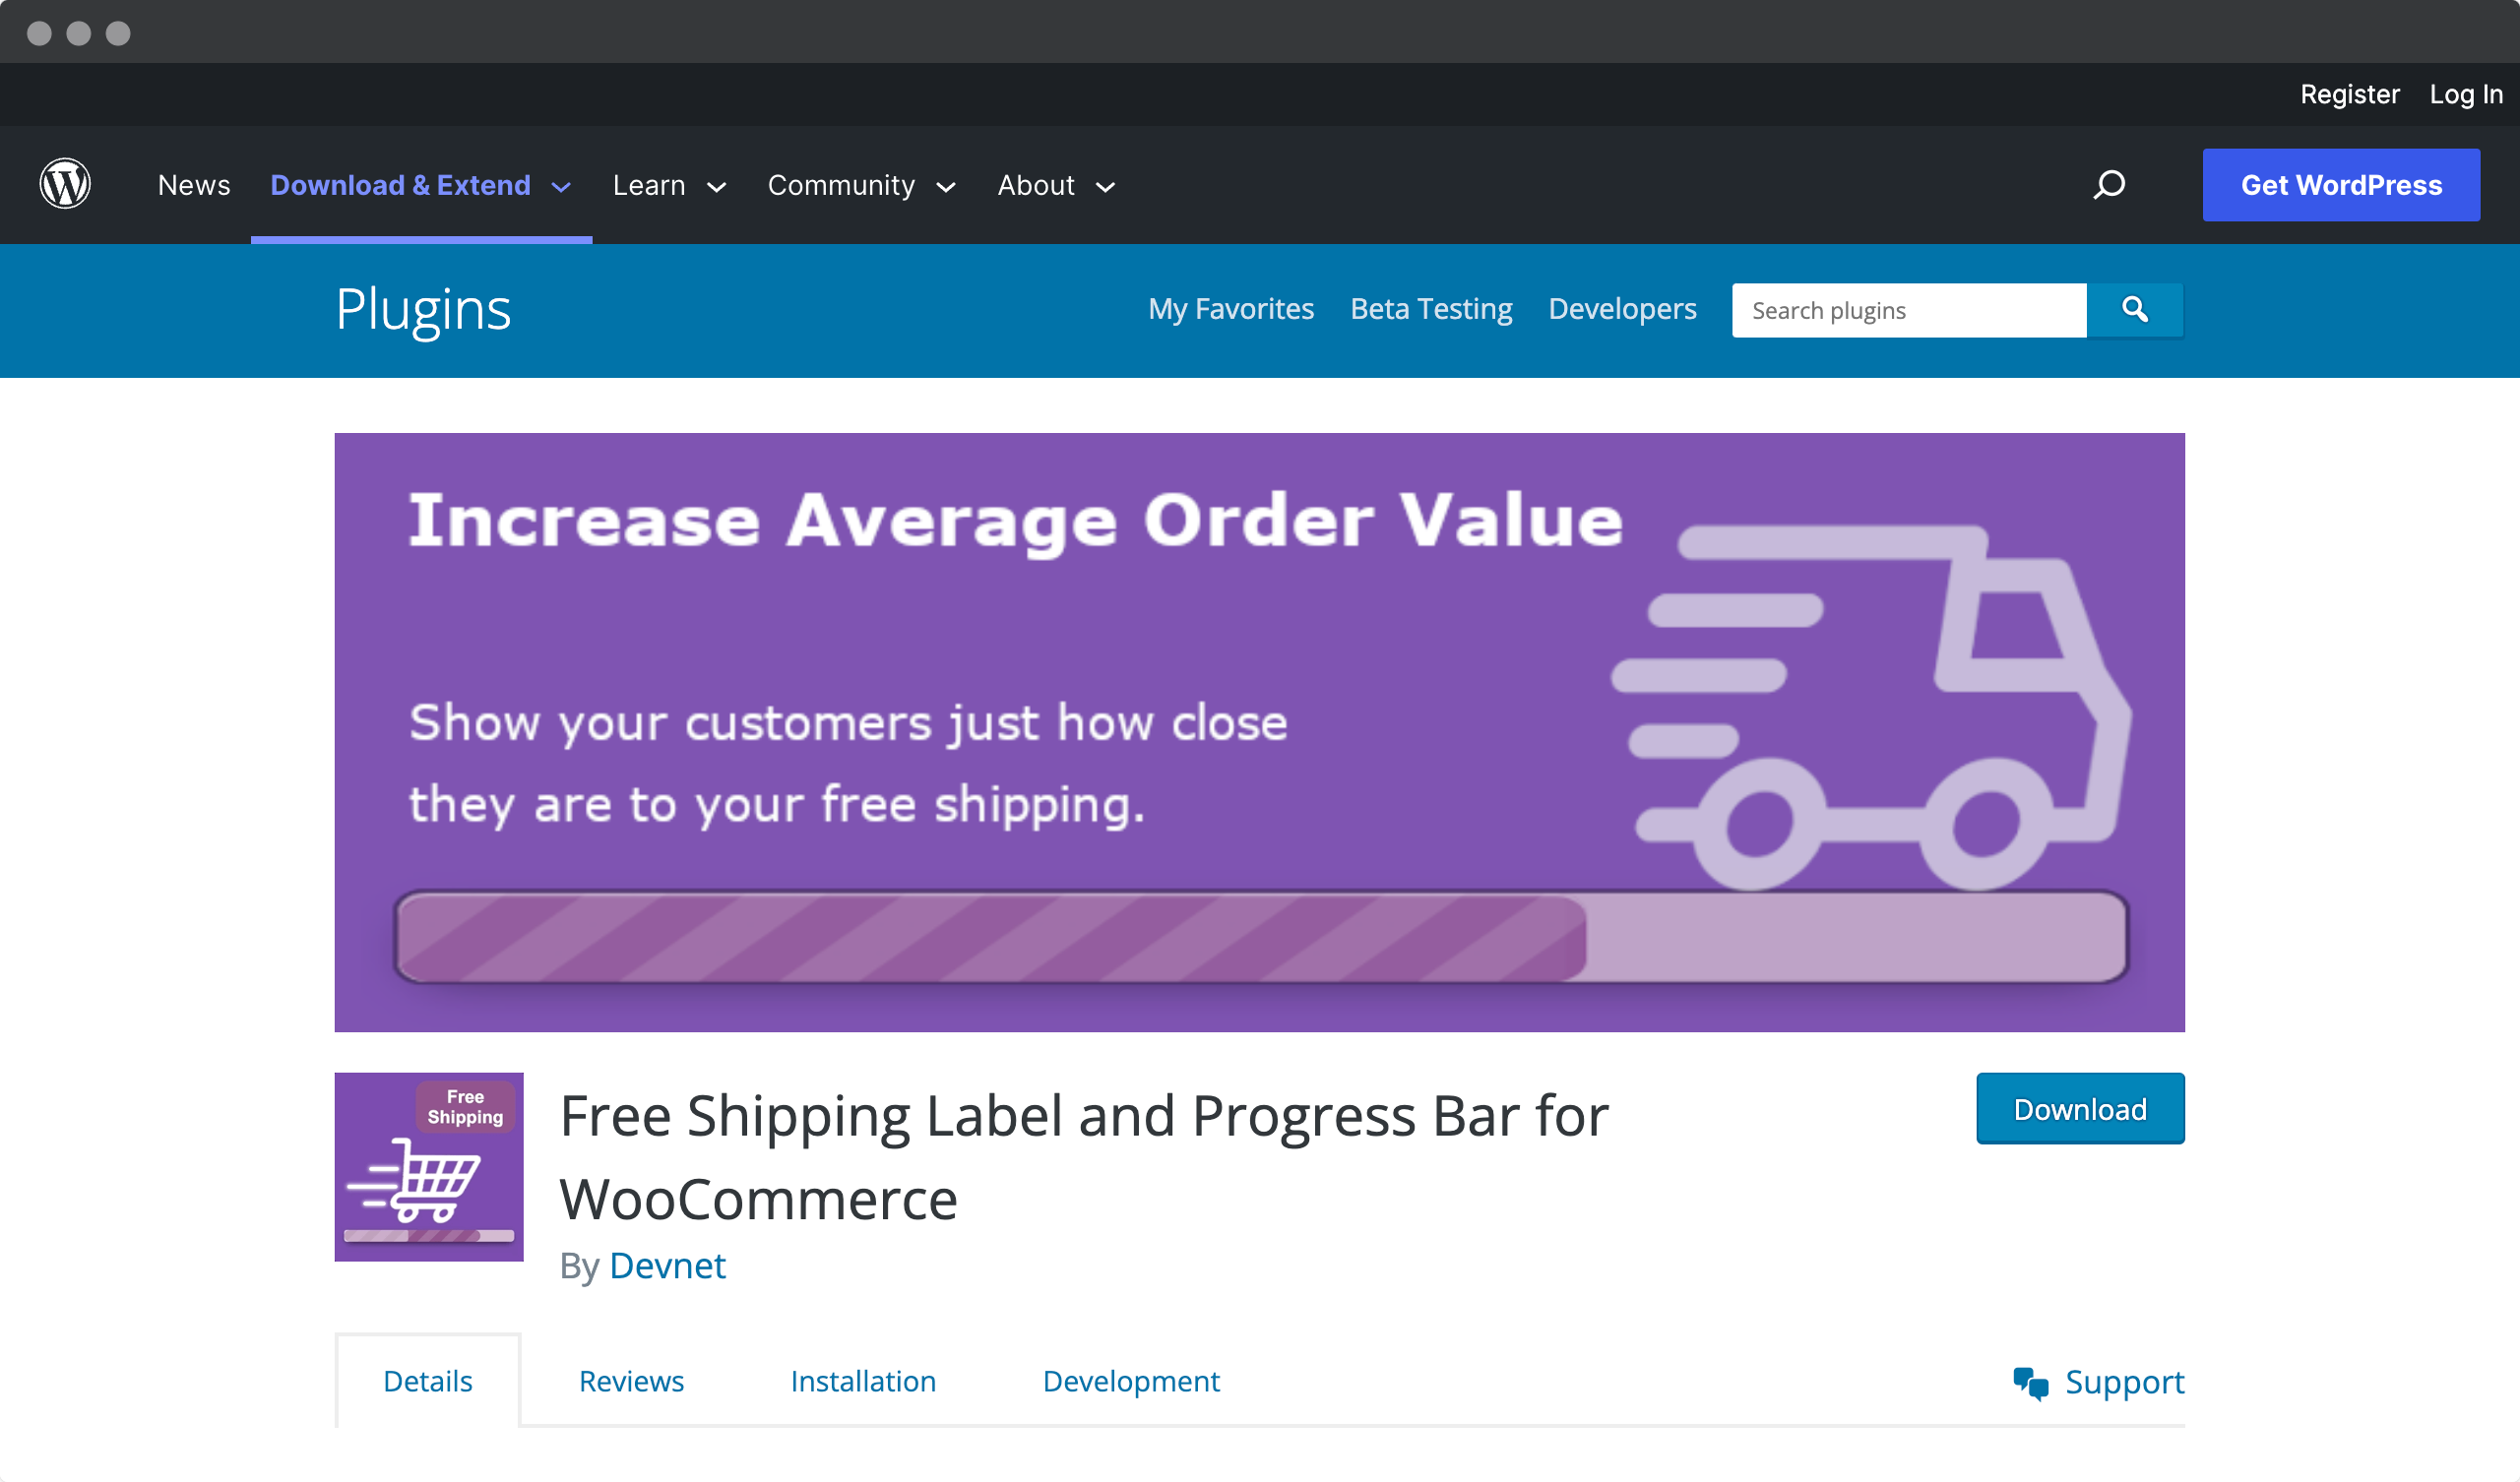 Screenshot of worpdress website - Free Shipping Label and Progress Bar for WooCommerce by Devnet